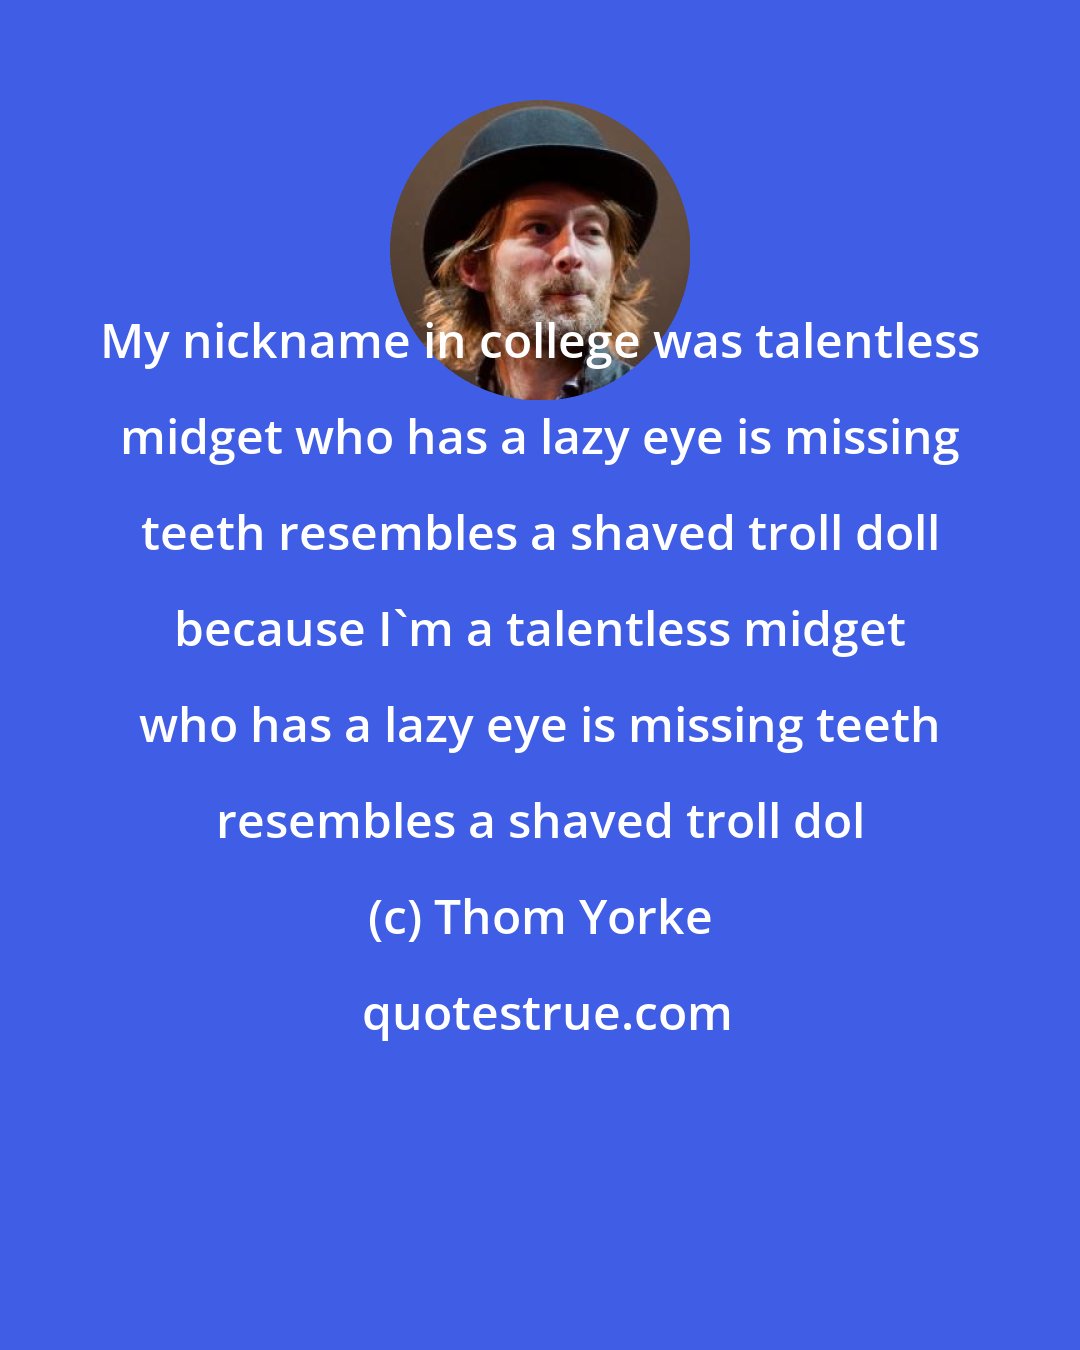 Thom Yorke: My nickname in college was talentless midget who has a lazy eye is missing teeth resembles a shaved troll doll because I'm a talentless midget who has a lazy eye is missing teeth resembles a shaved troll dol